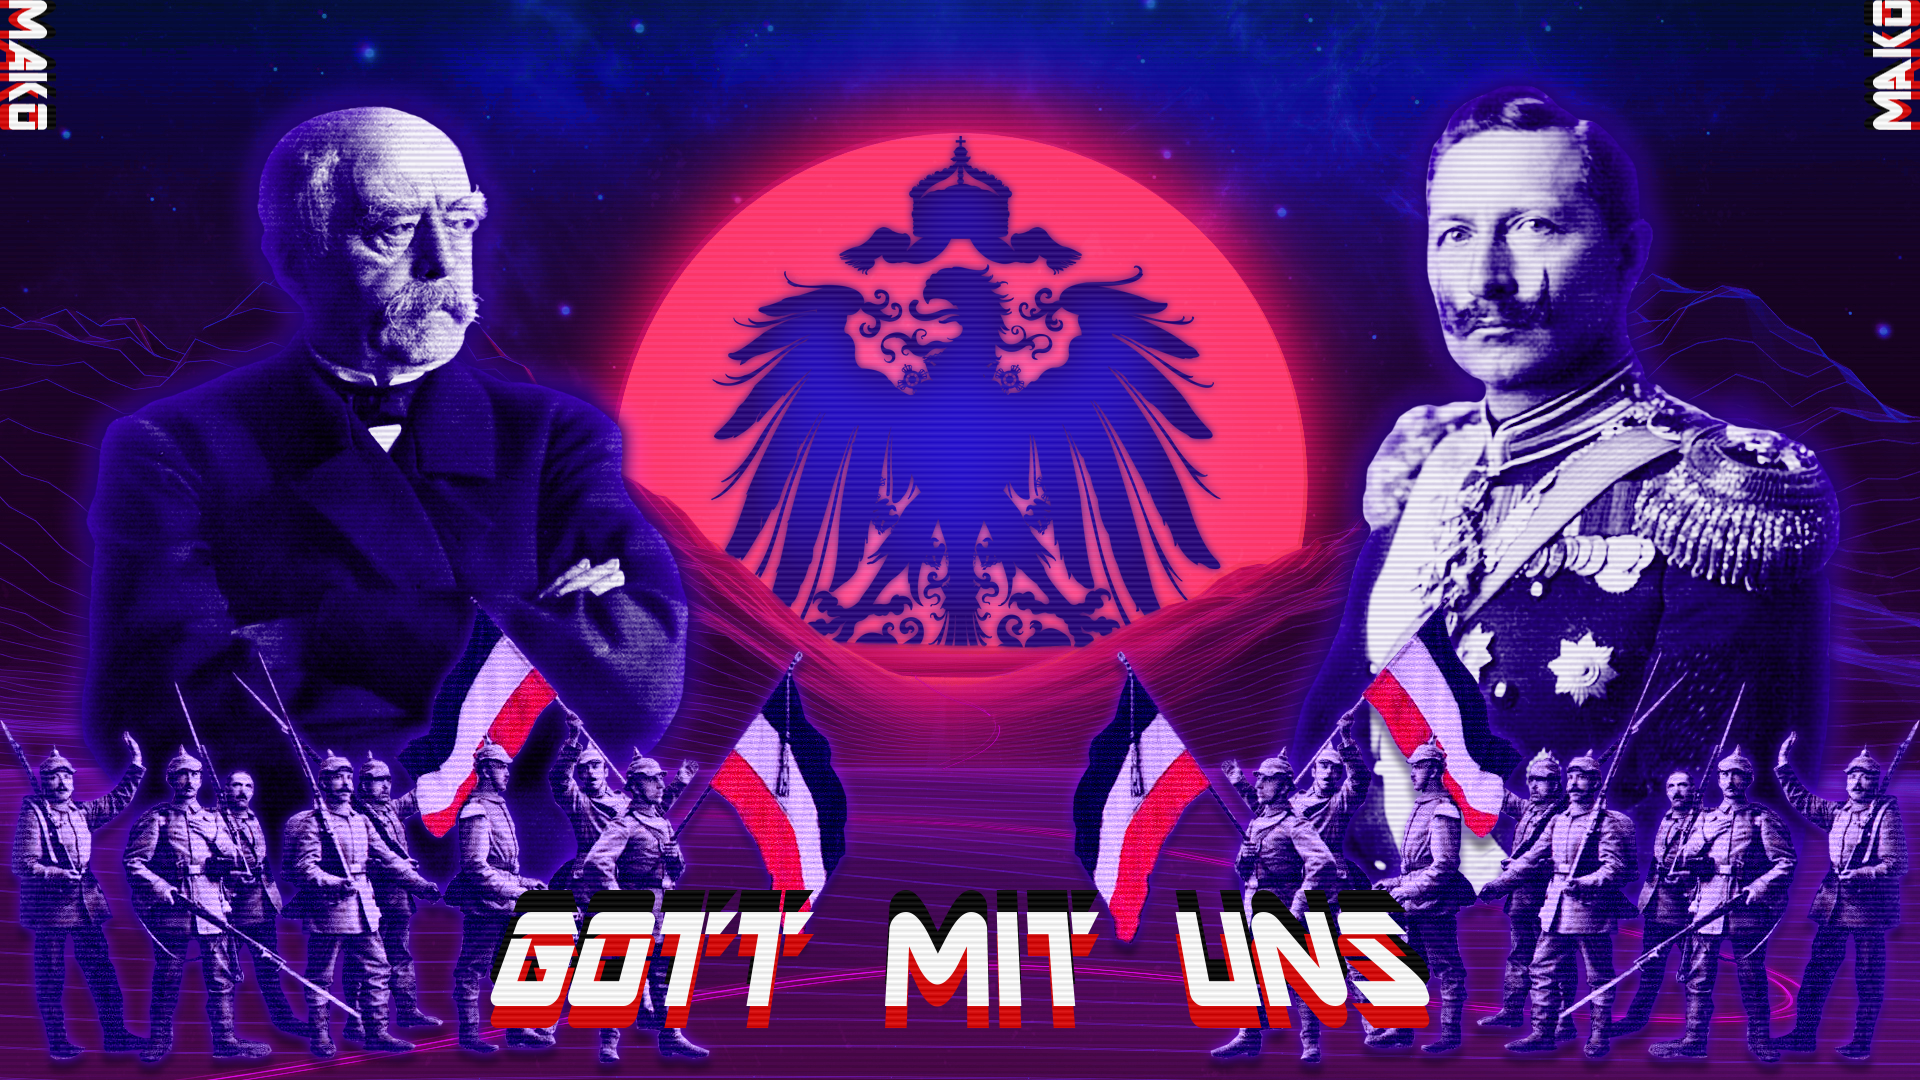 Another Monarchist Vaporwave Artwork This Time With Kaiser Willy